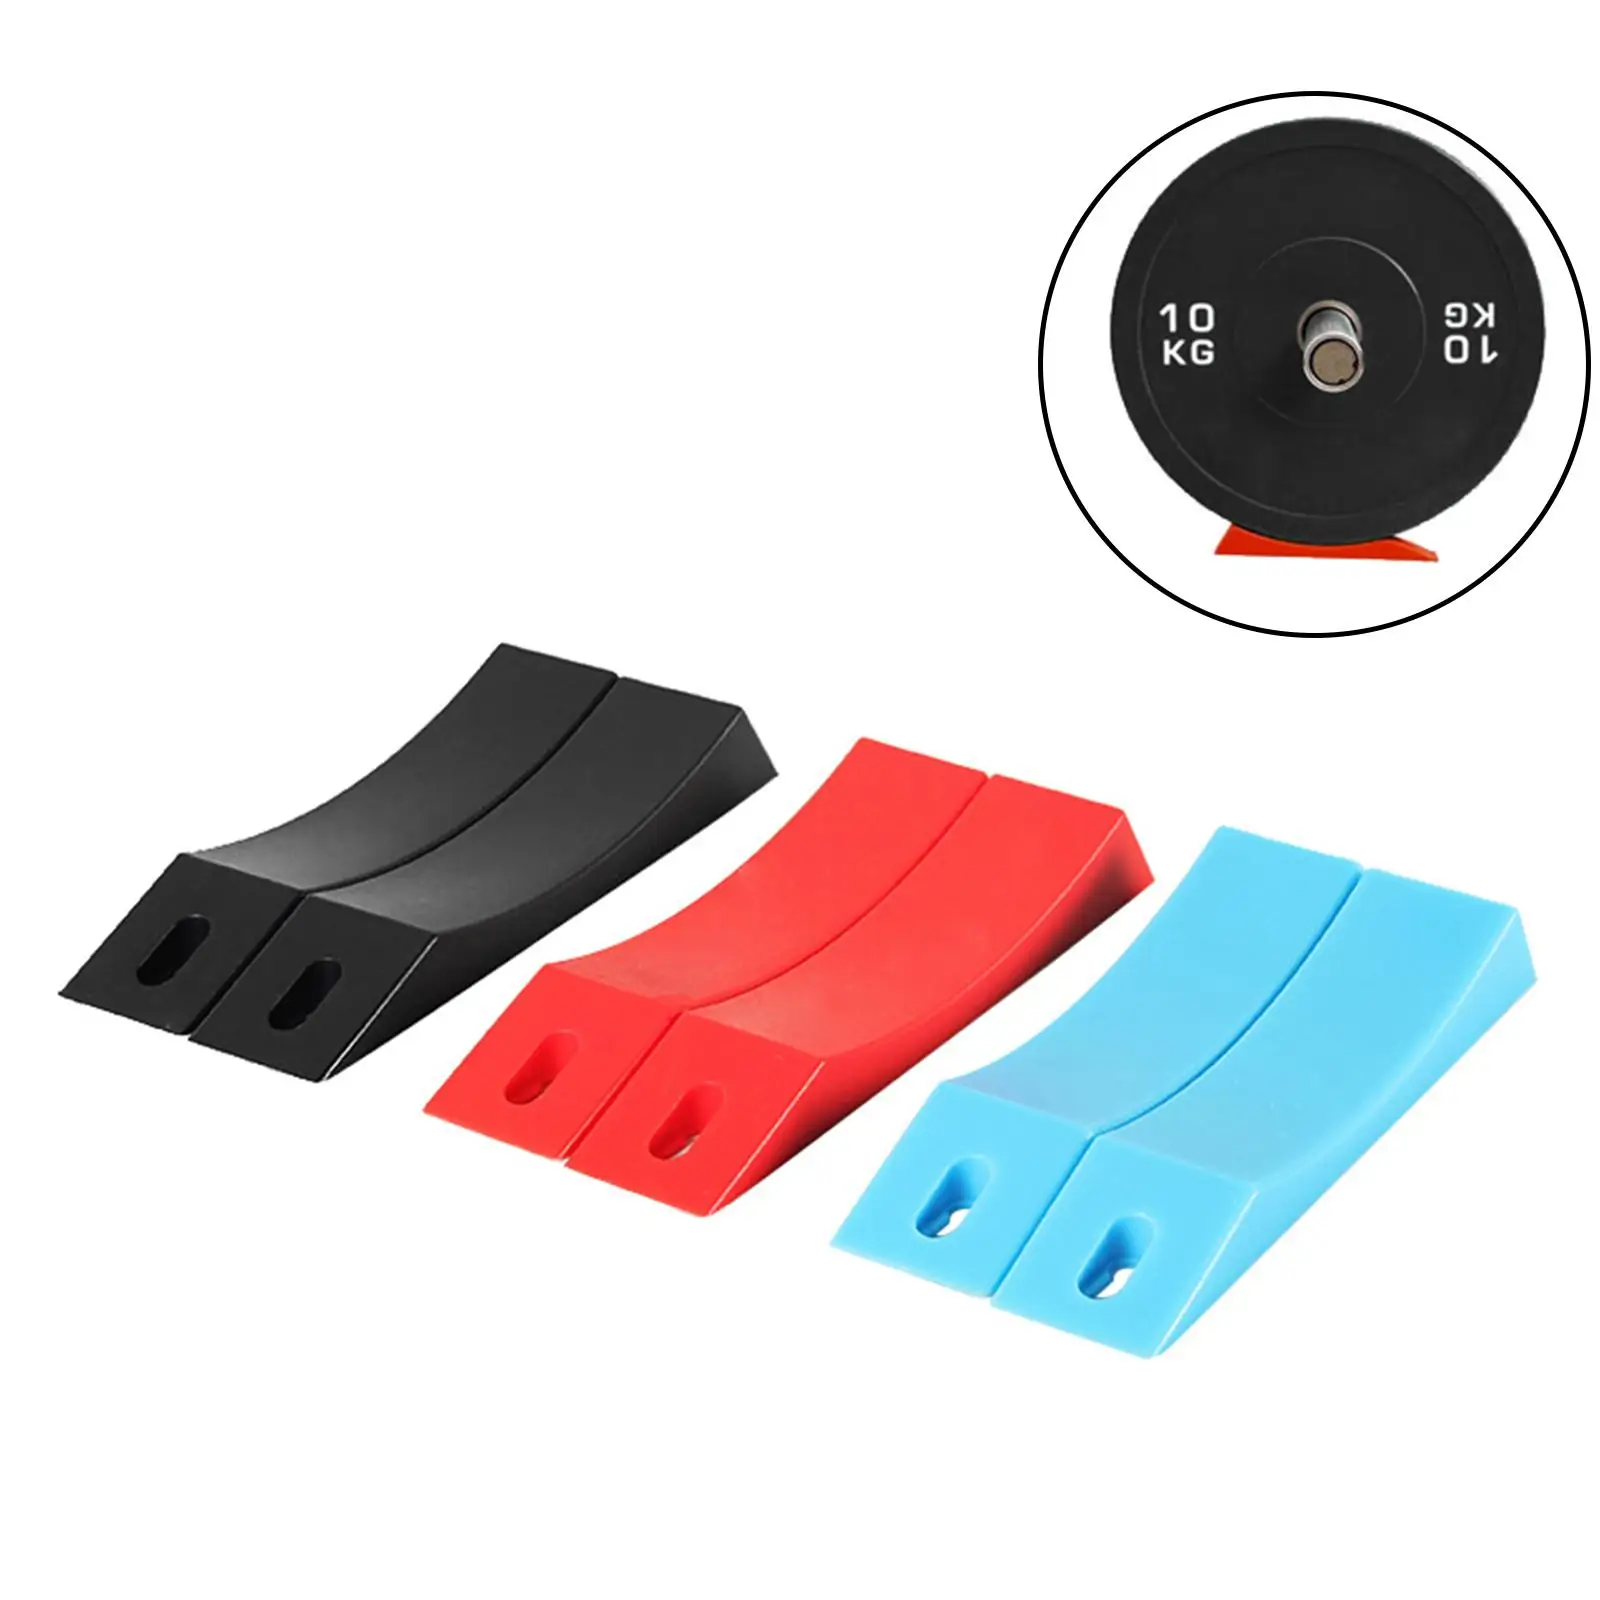 2Pcs Replacement Portable Universal Fixation Pad for Deadlift Dumbbell Saddles for Training Home